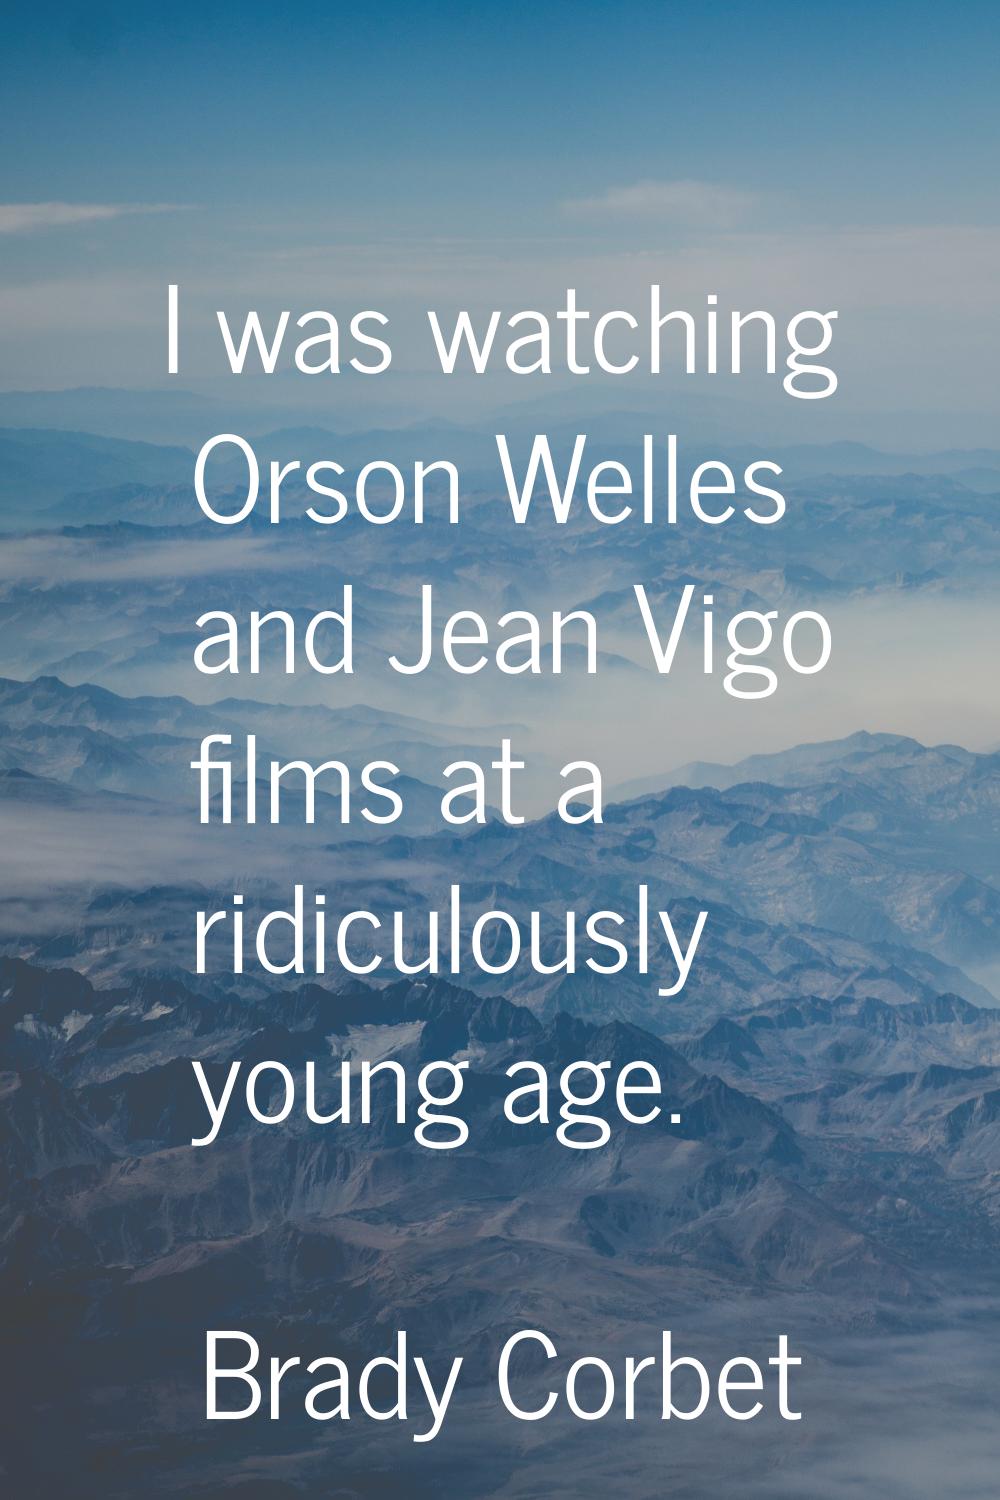 I was watching Orson Welles and Jean Vigo films at a ridiculously young age.